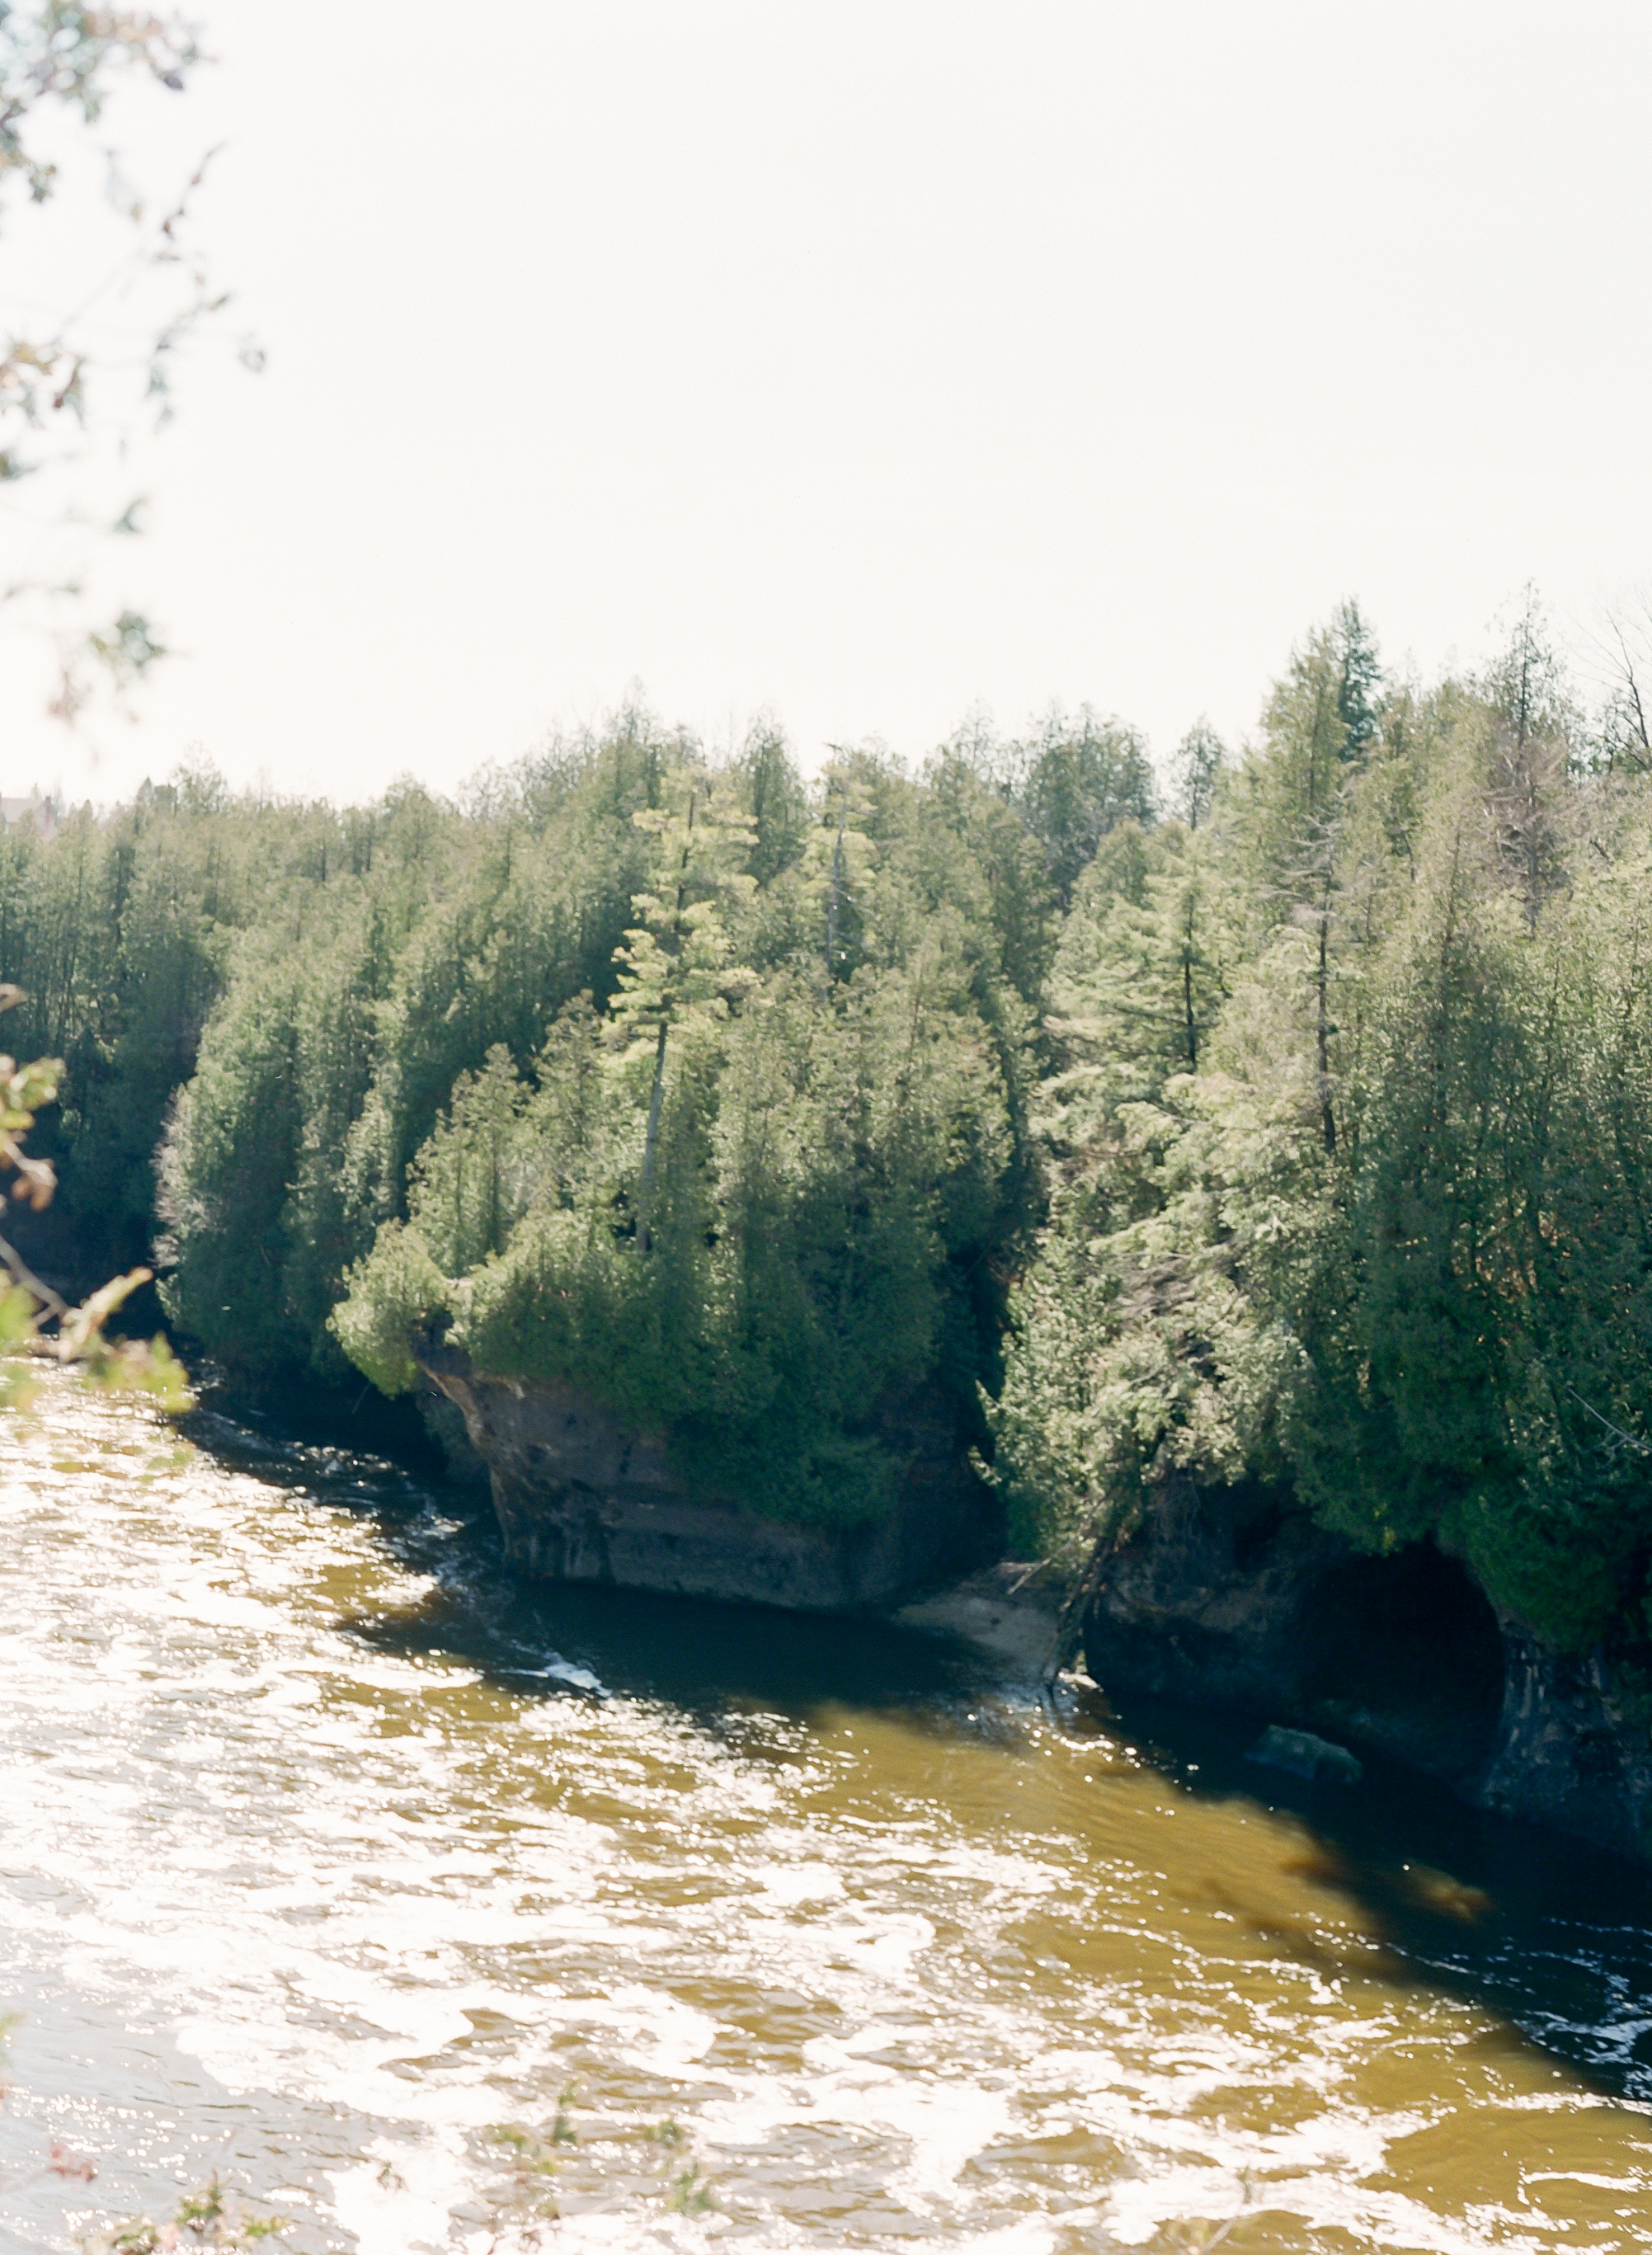 An Elora Engagement Session at Lover's Leap